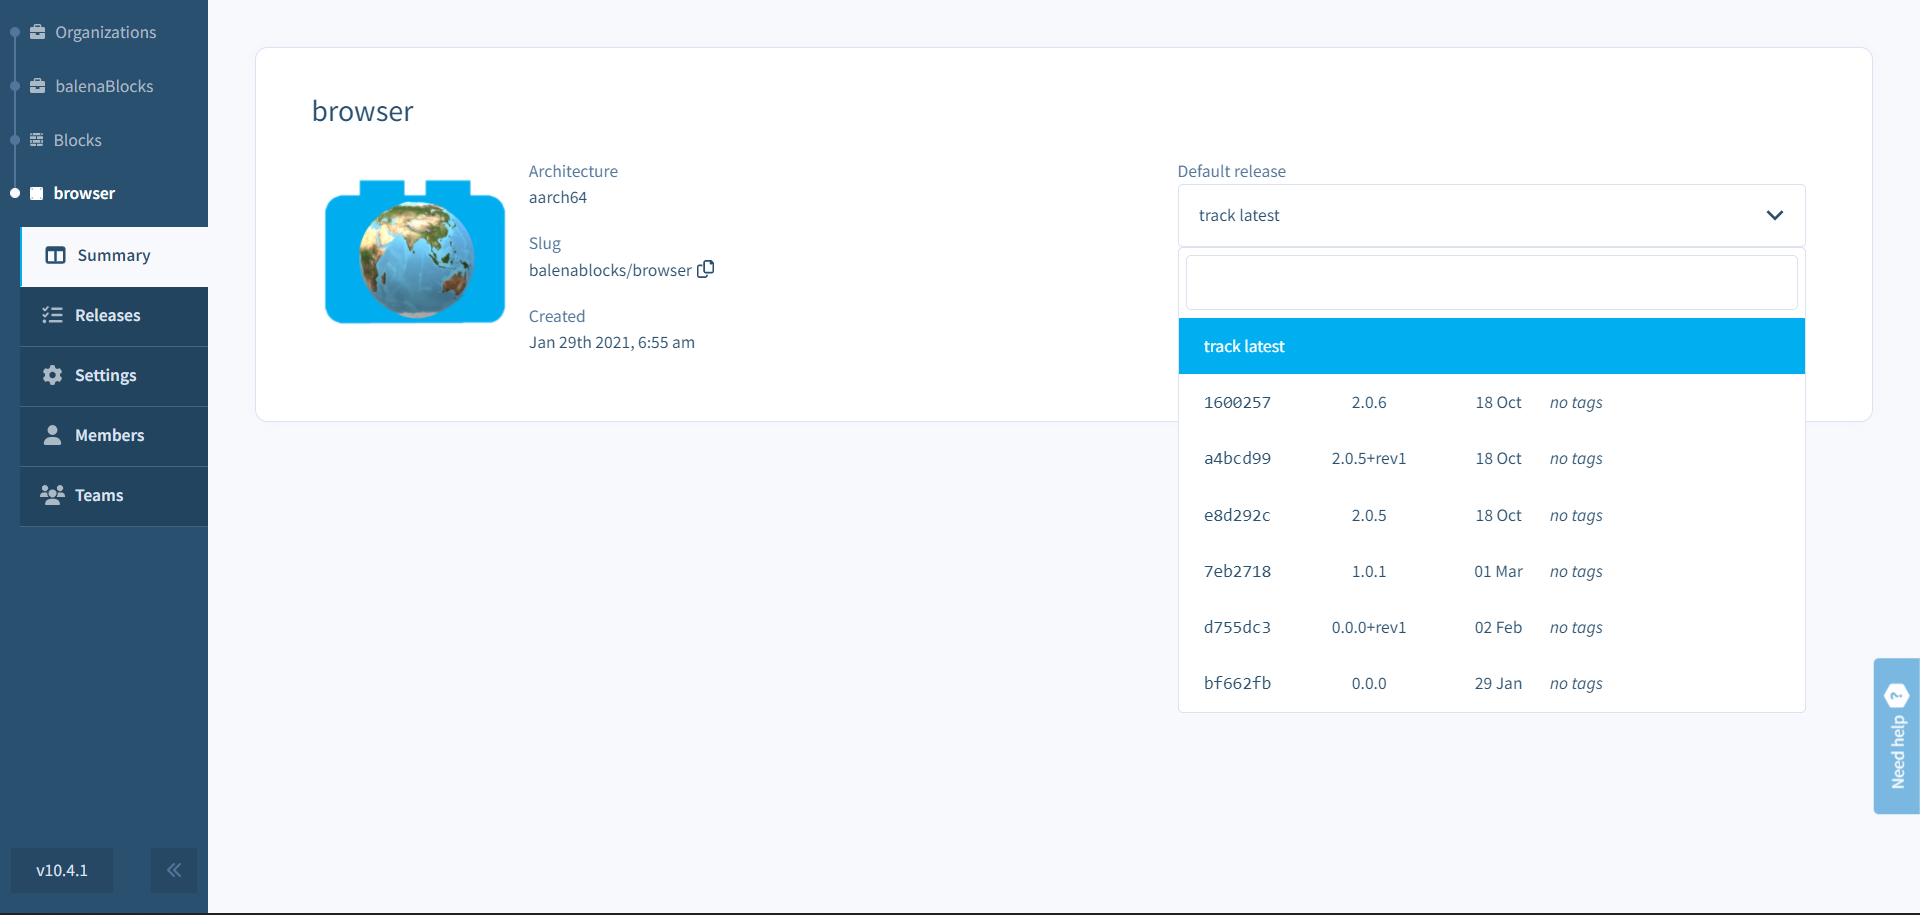 Manage blocks in a similar way you'd manage other things in balenaCloud